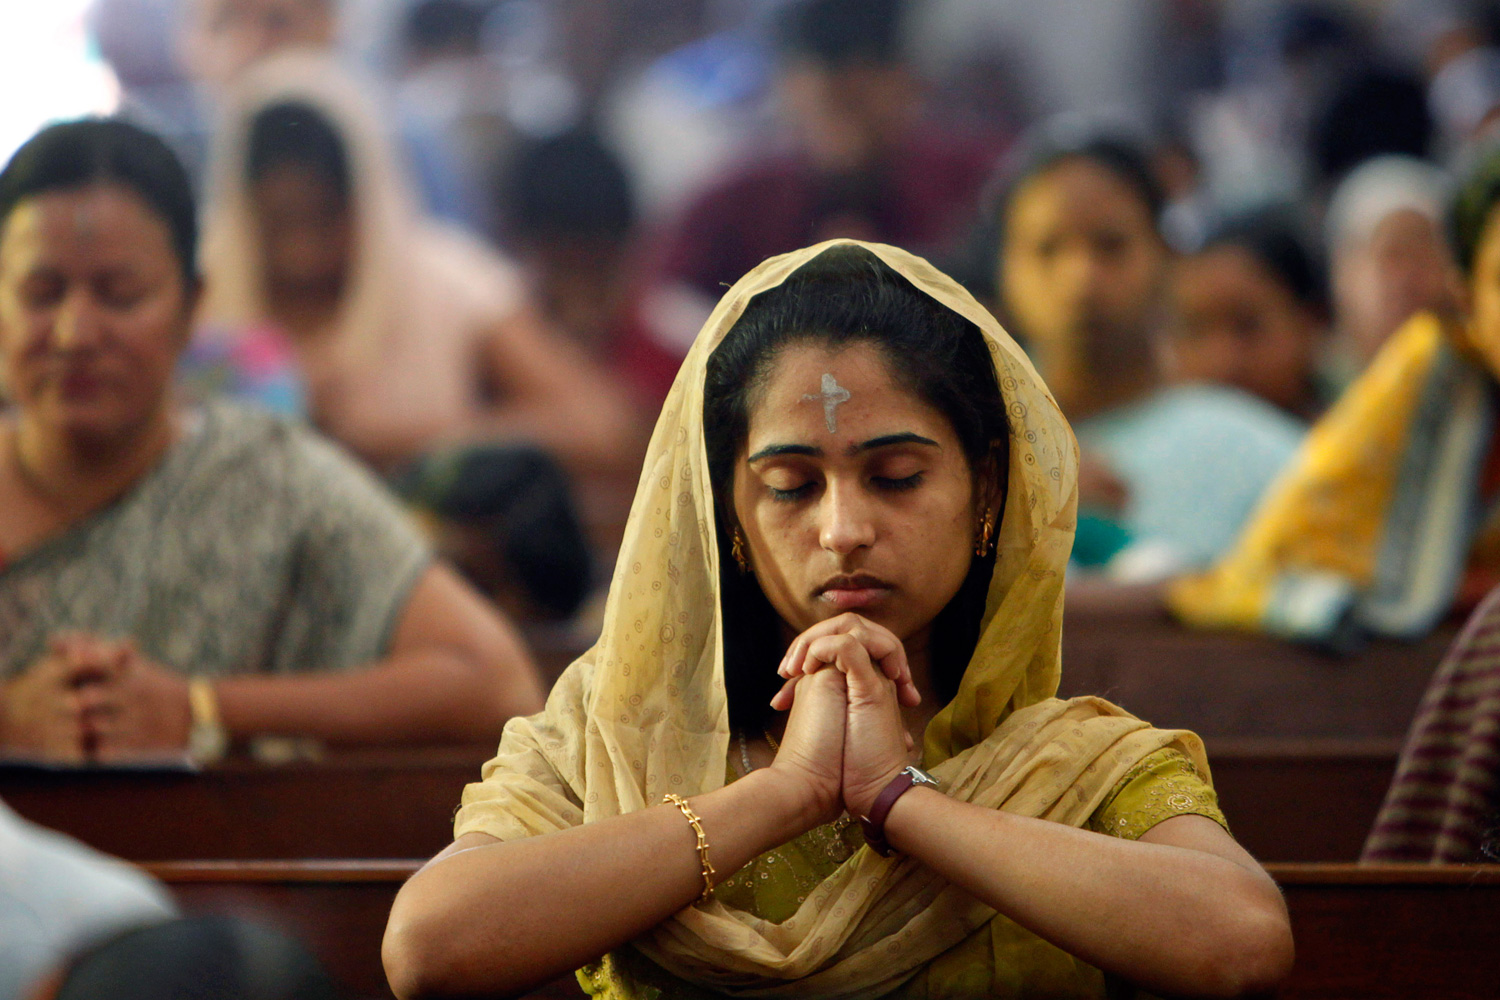 Feb. 22, 2012. Indian Christians offer prayers during a mass in observance of Ash Wednesday at a Catholic church in Hyderabad, India.